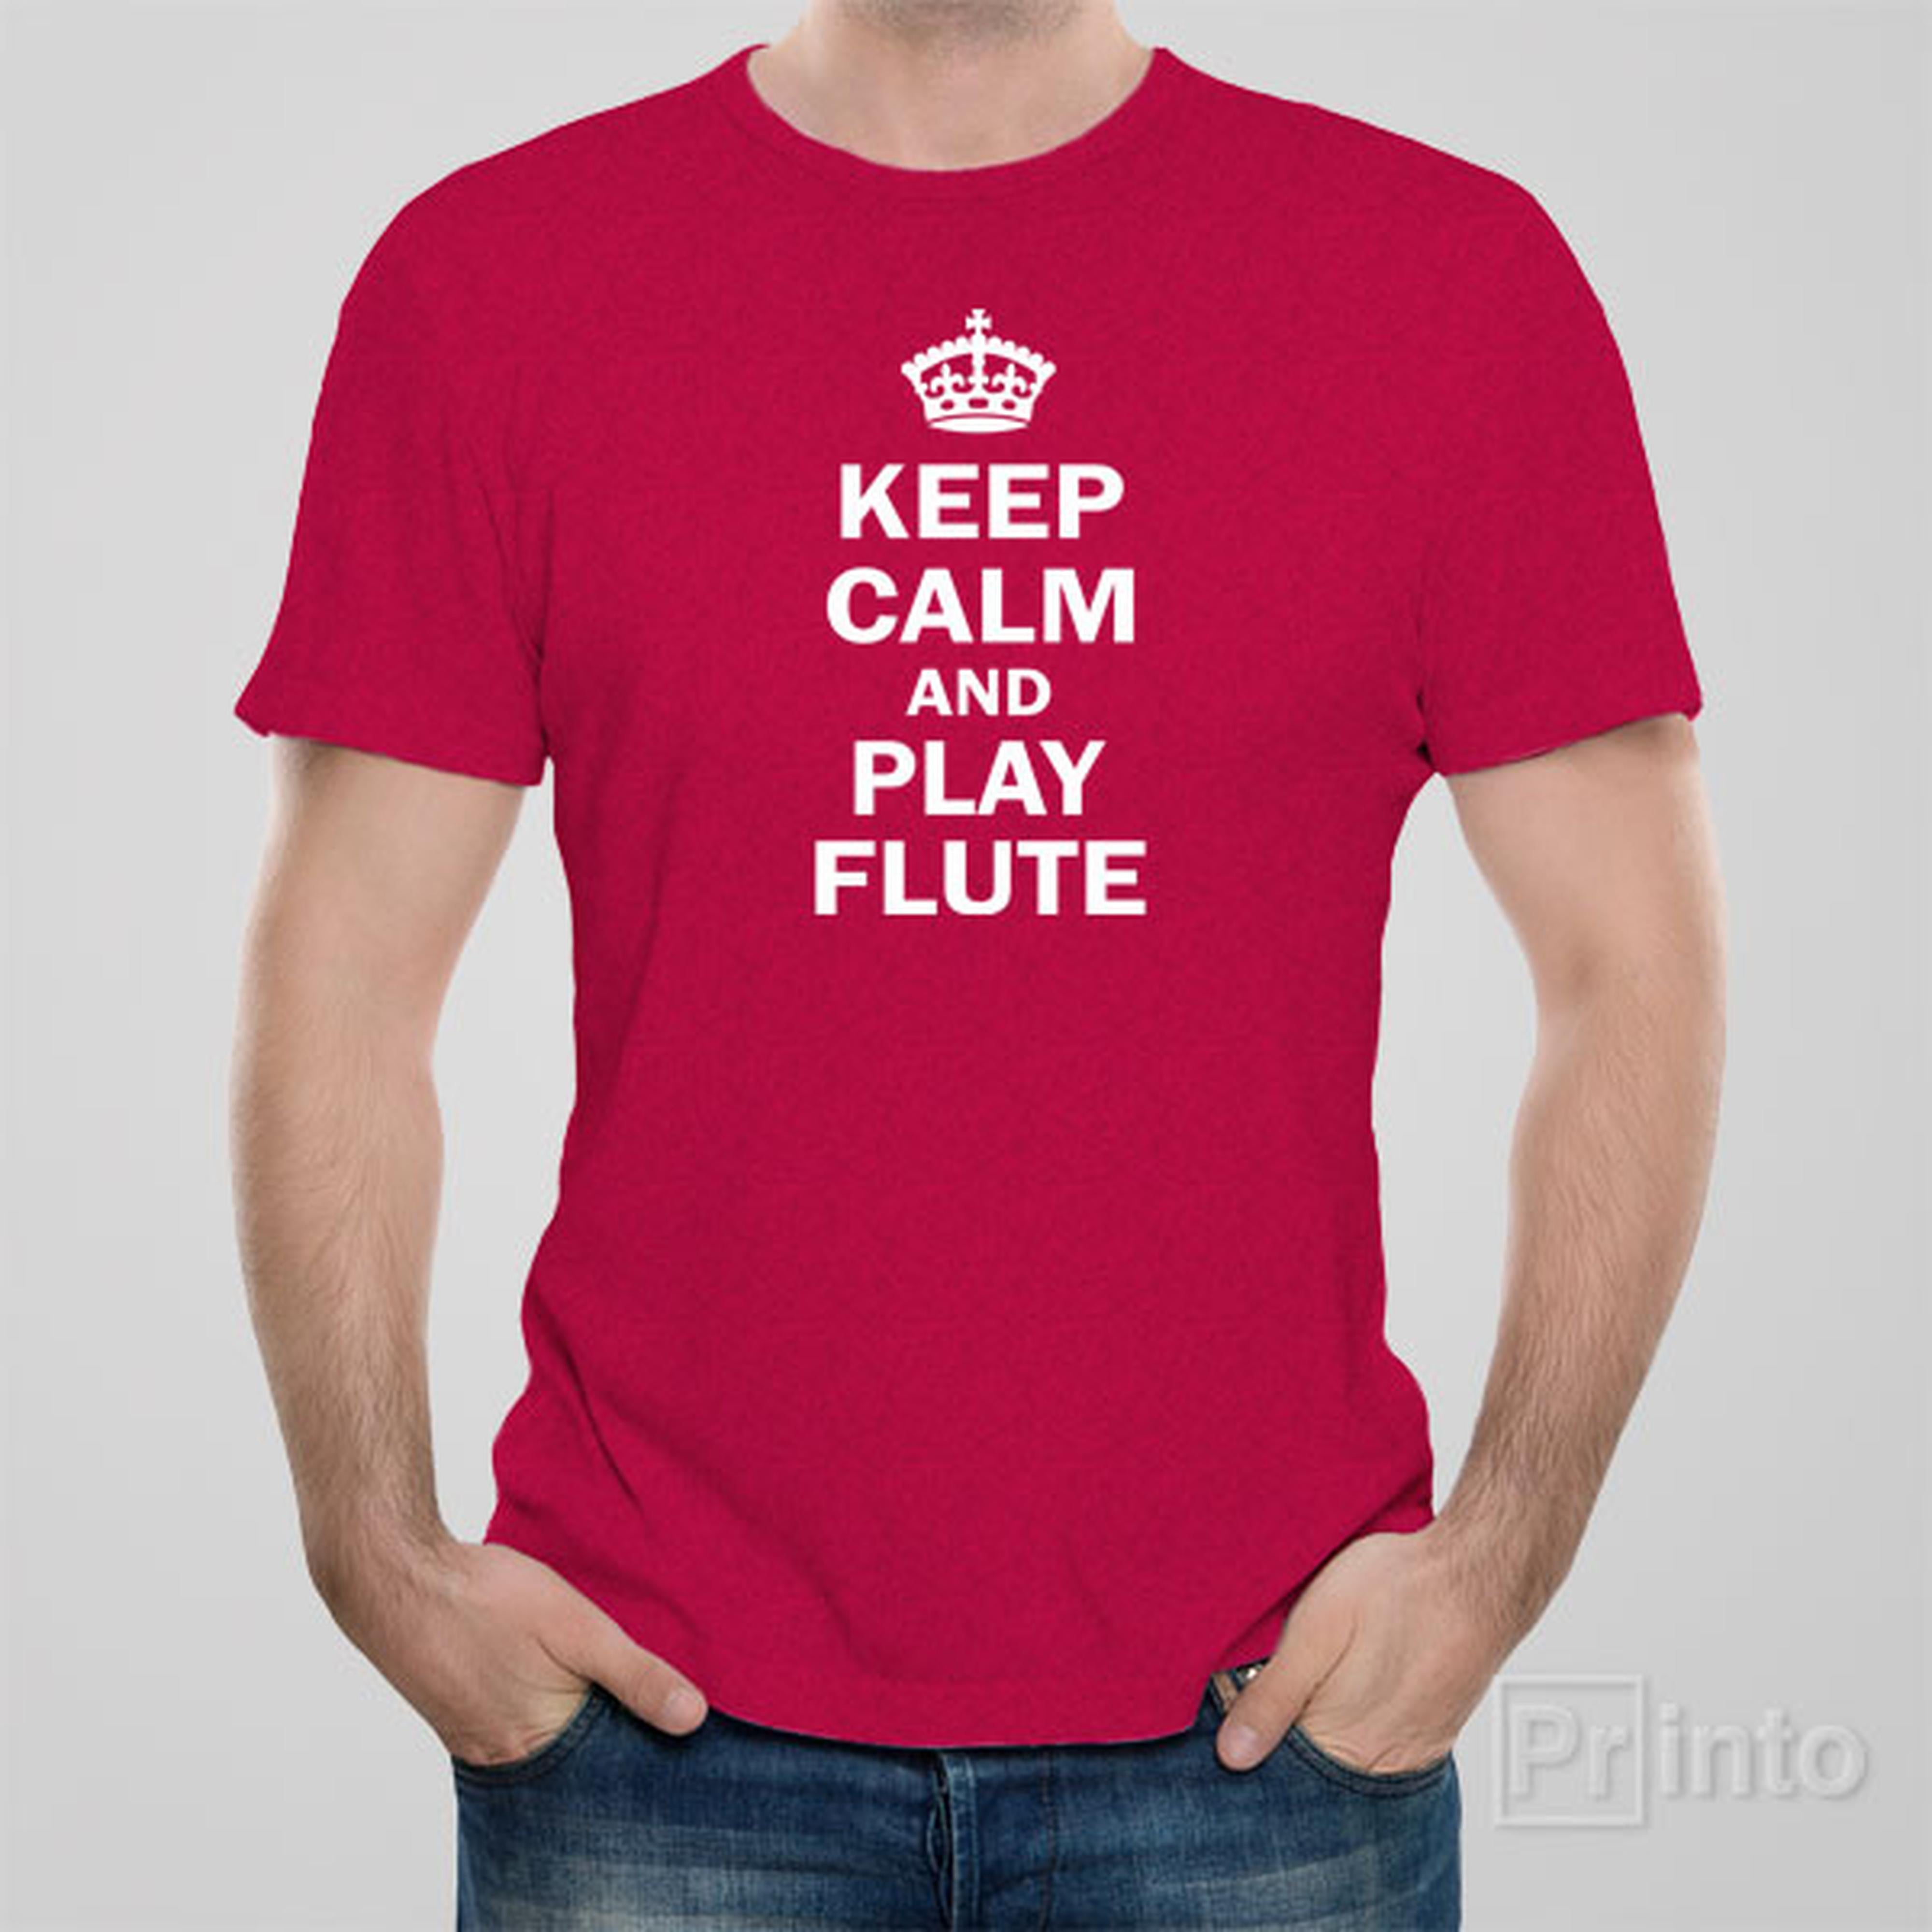 keep-calm-and-play-flute-t-shirt